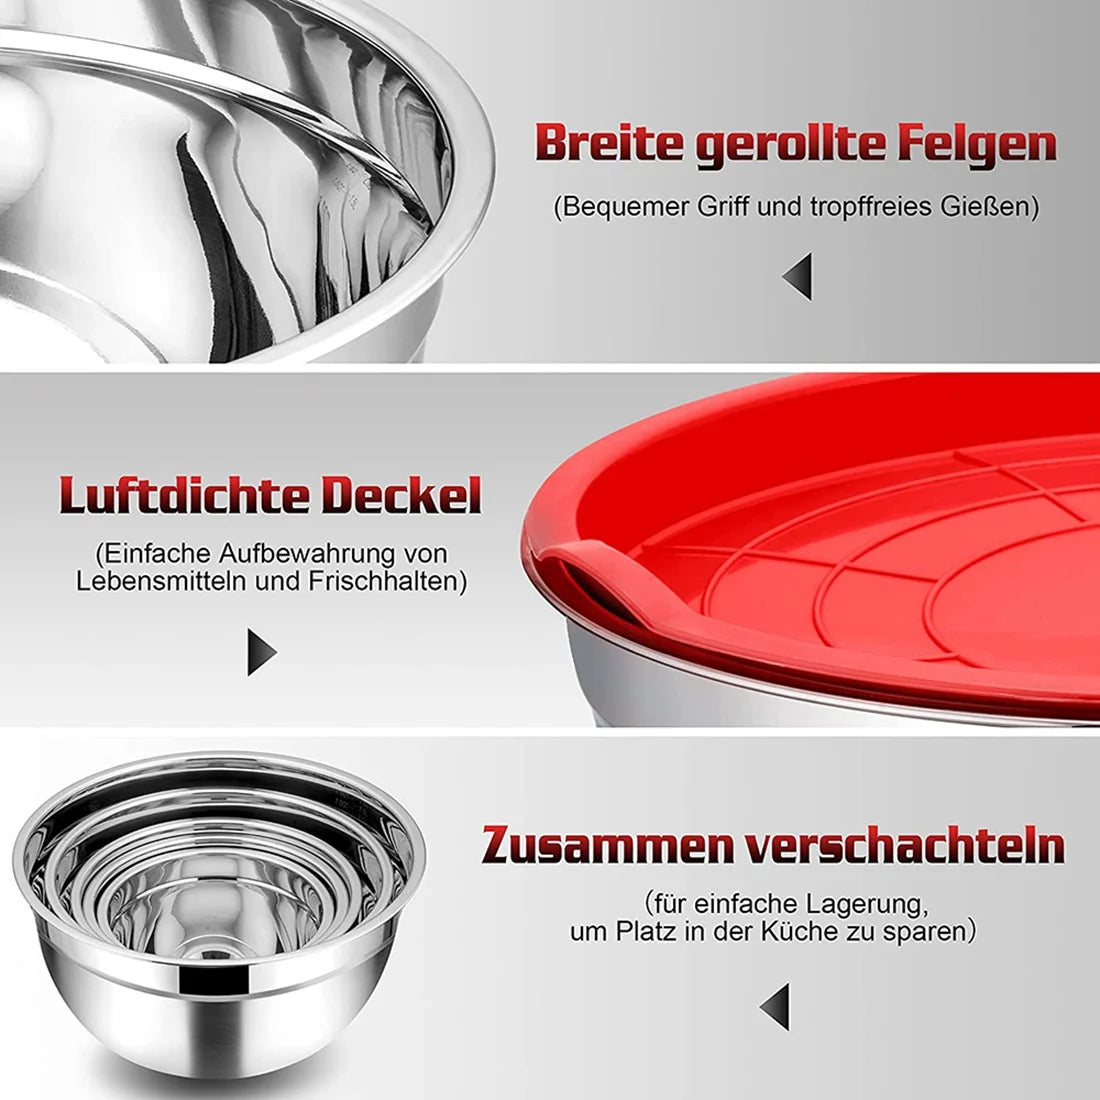 5 Pieces Mixing Bowl, Stainless Steel Salad Bowl Stackable Serving Bowl with Airtight Lids